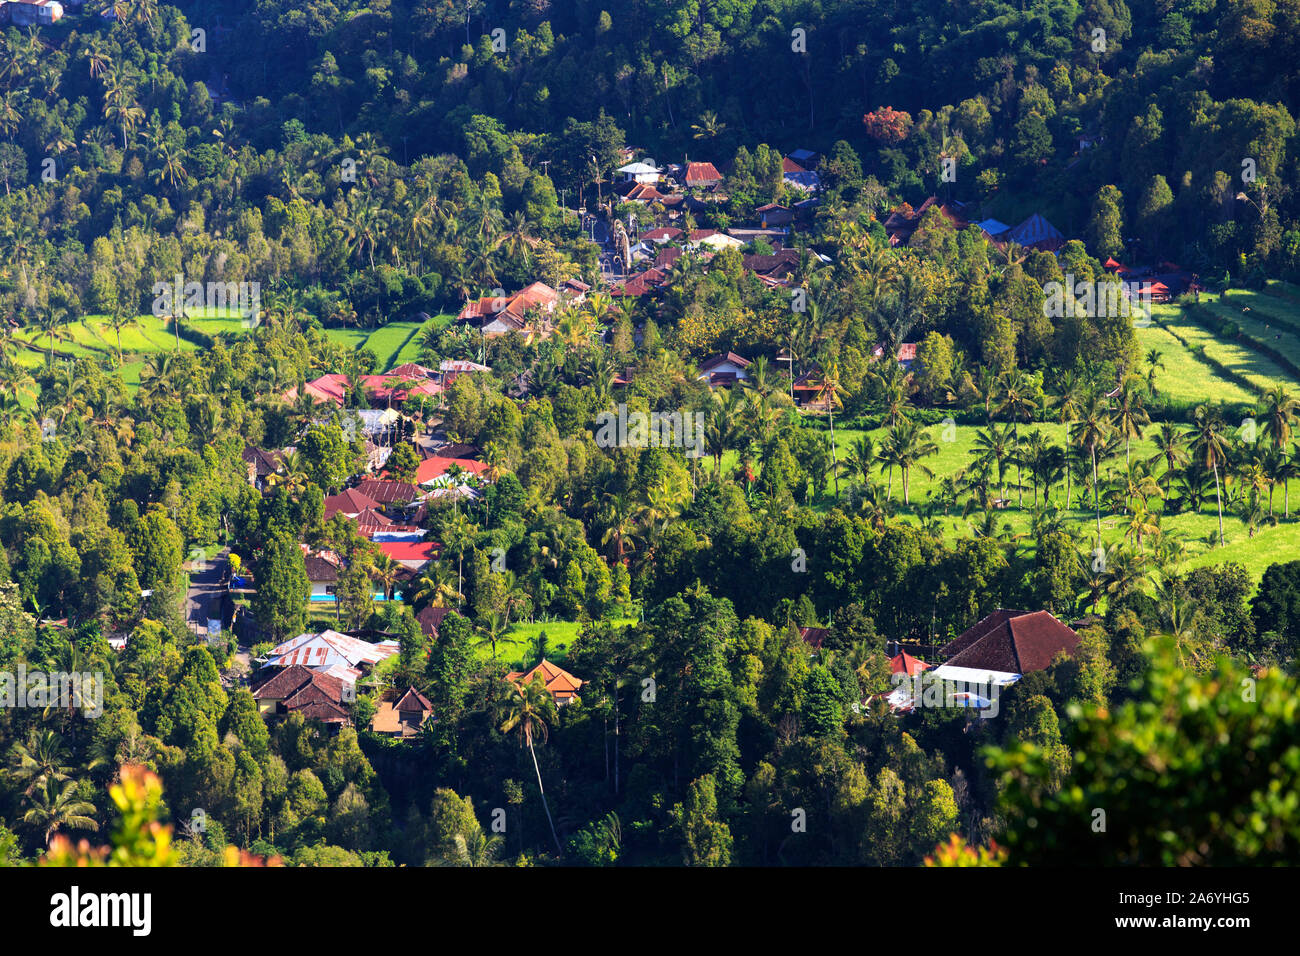 Indonesia, Bali, Central Mountains, Munduk, mountain landscape and small villages seen from a hike around the popular trekking destination of Munduk Stock Photo